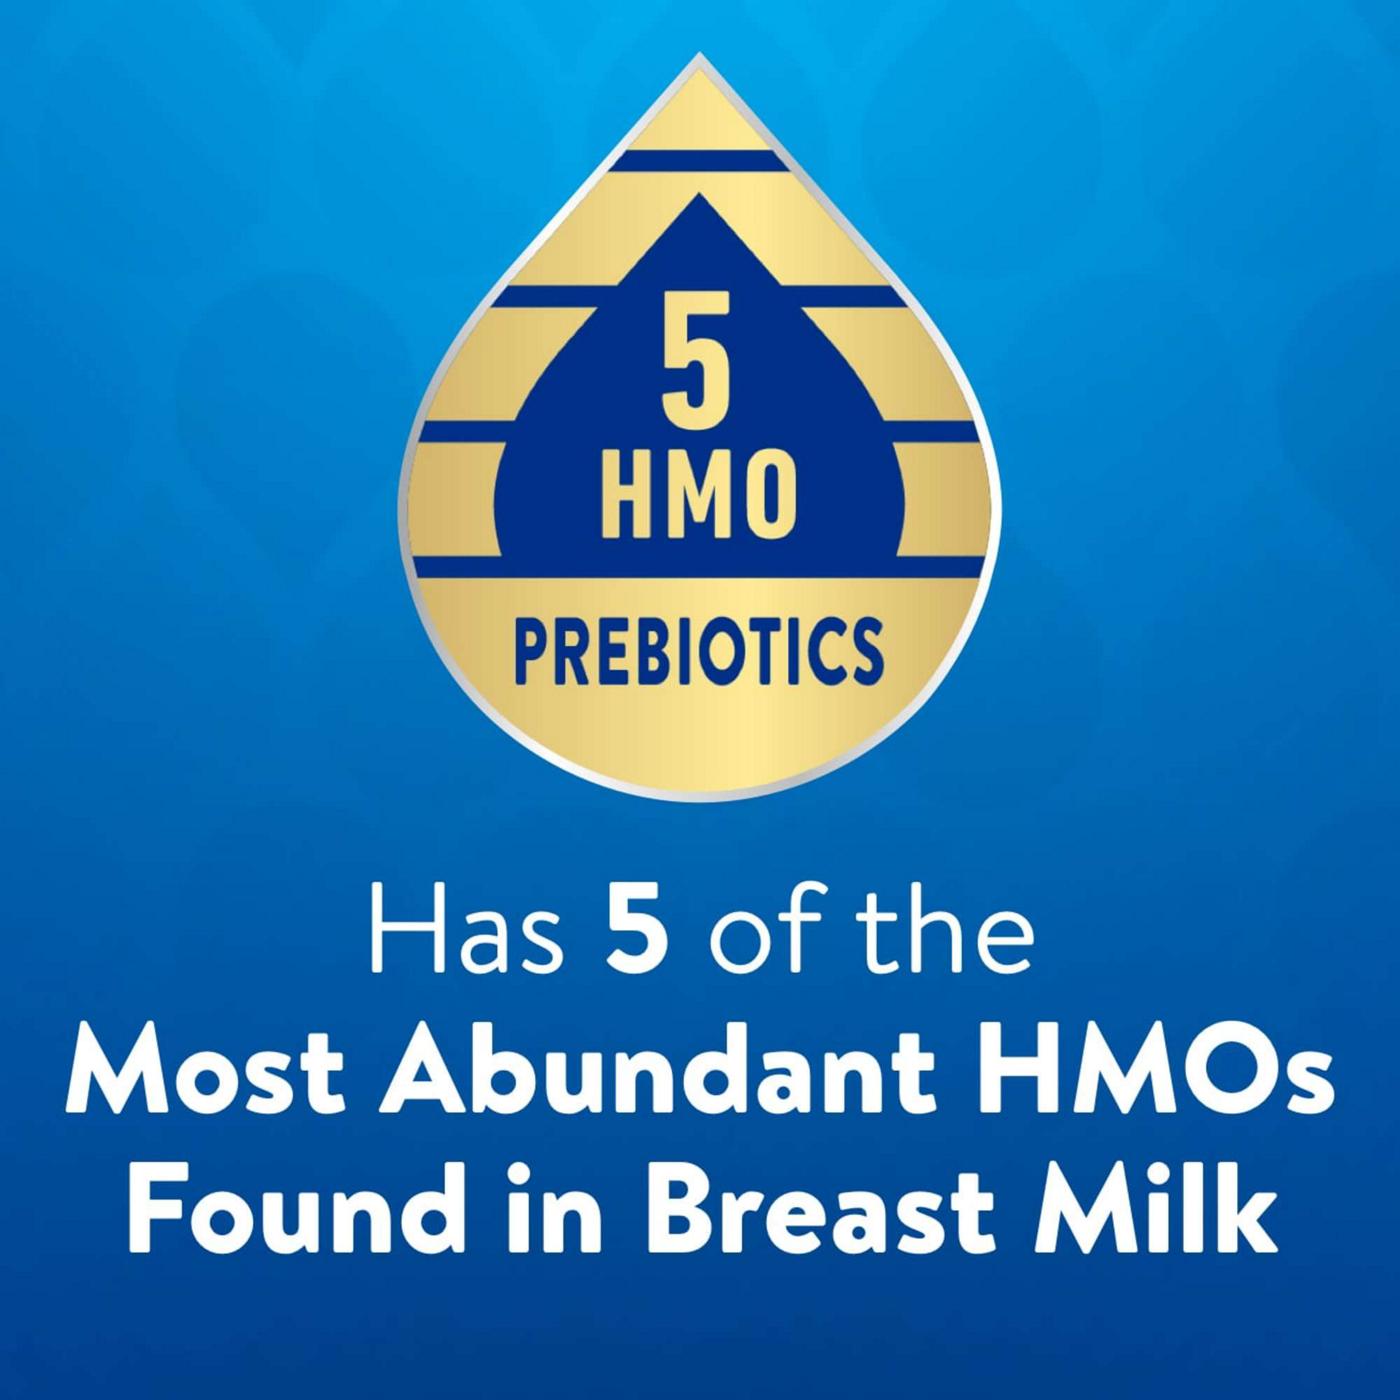 Similac 360 Total Care Ready-to-Feed Infant Formula with 5 HMO Prebiotics; image 5 of 8